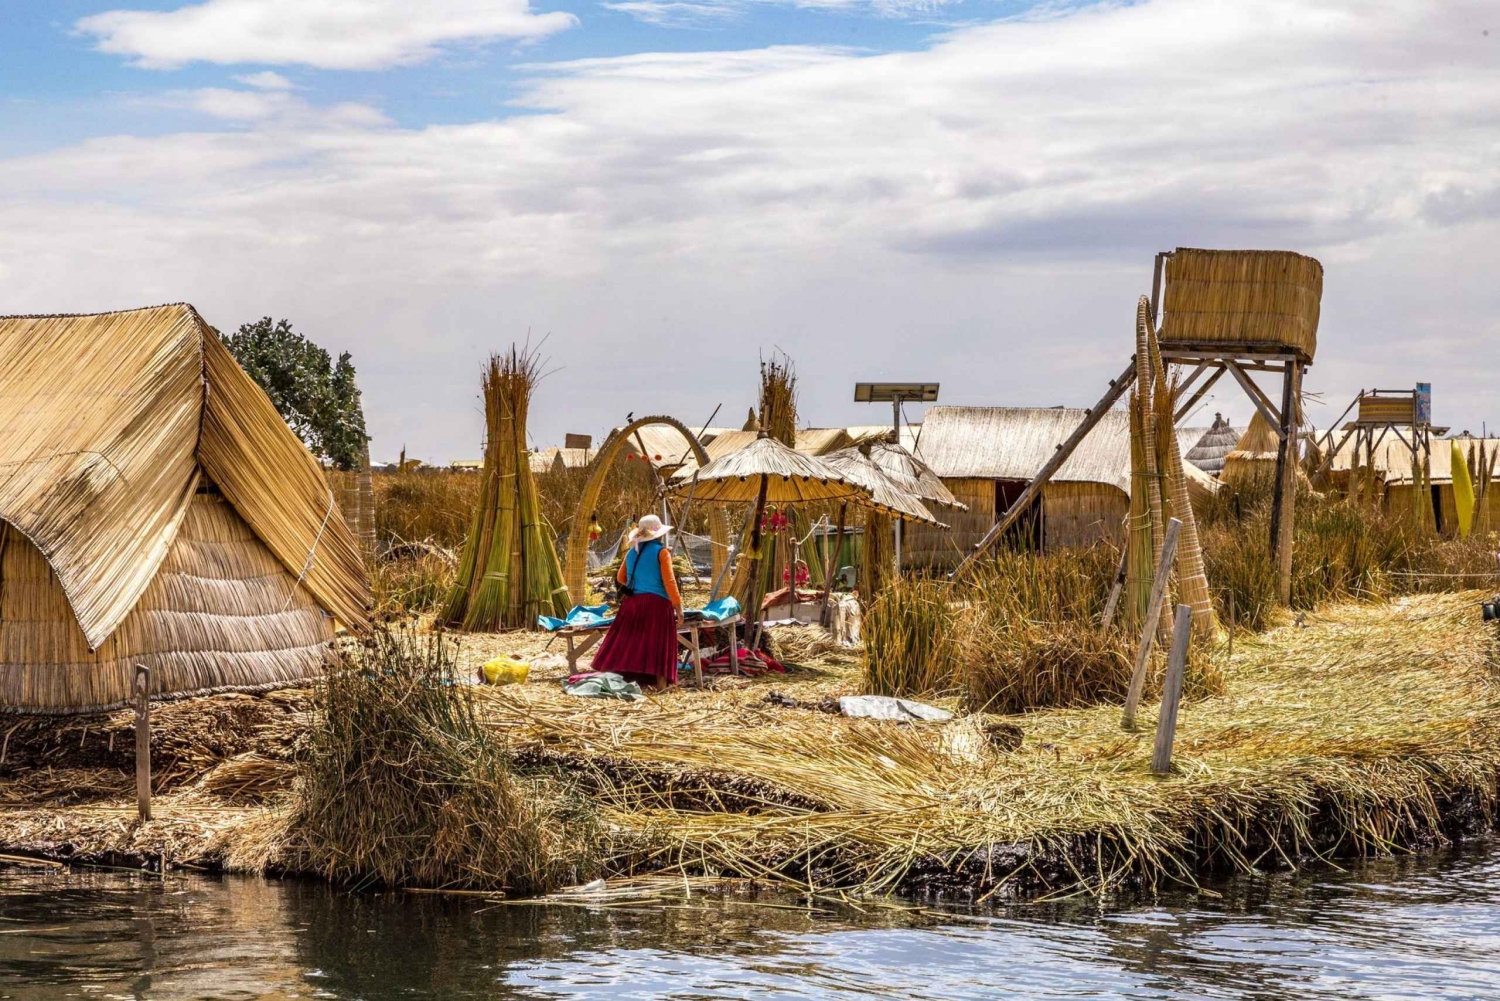 Half-Day Uros Floating Islands Tour from Puno